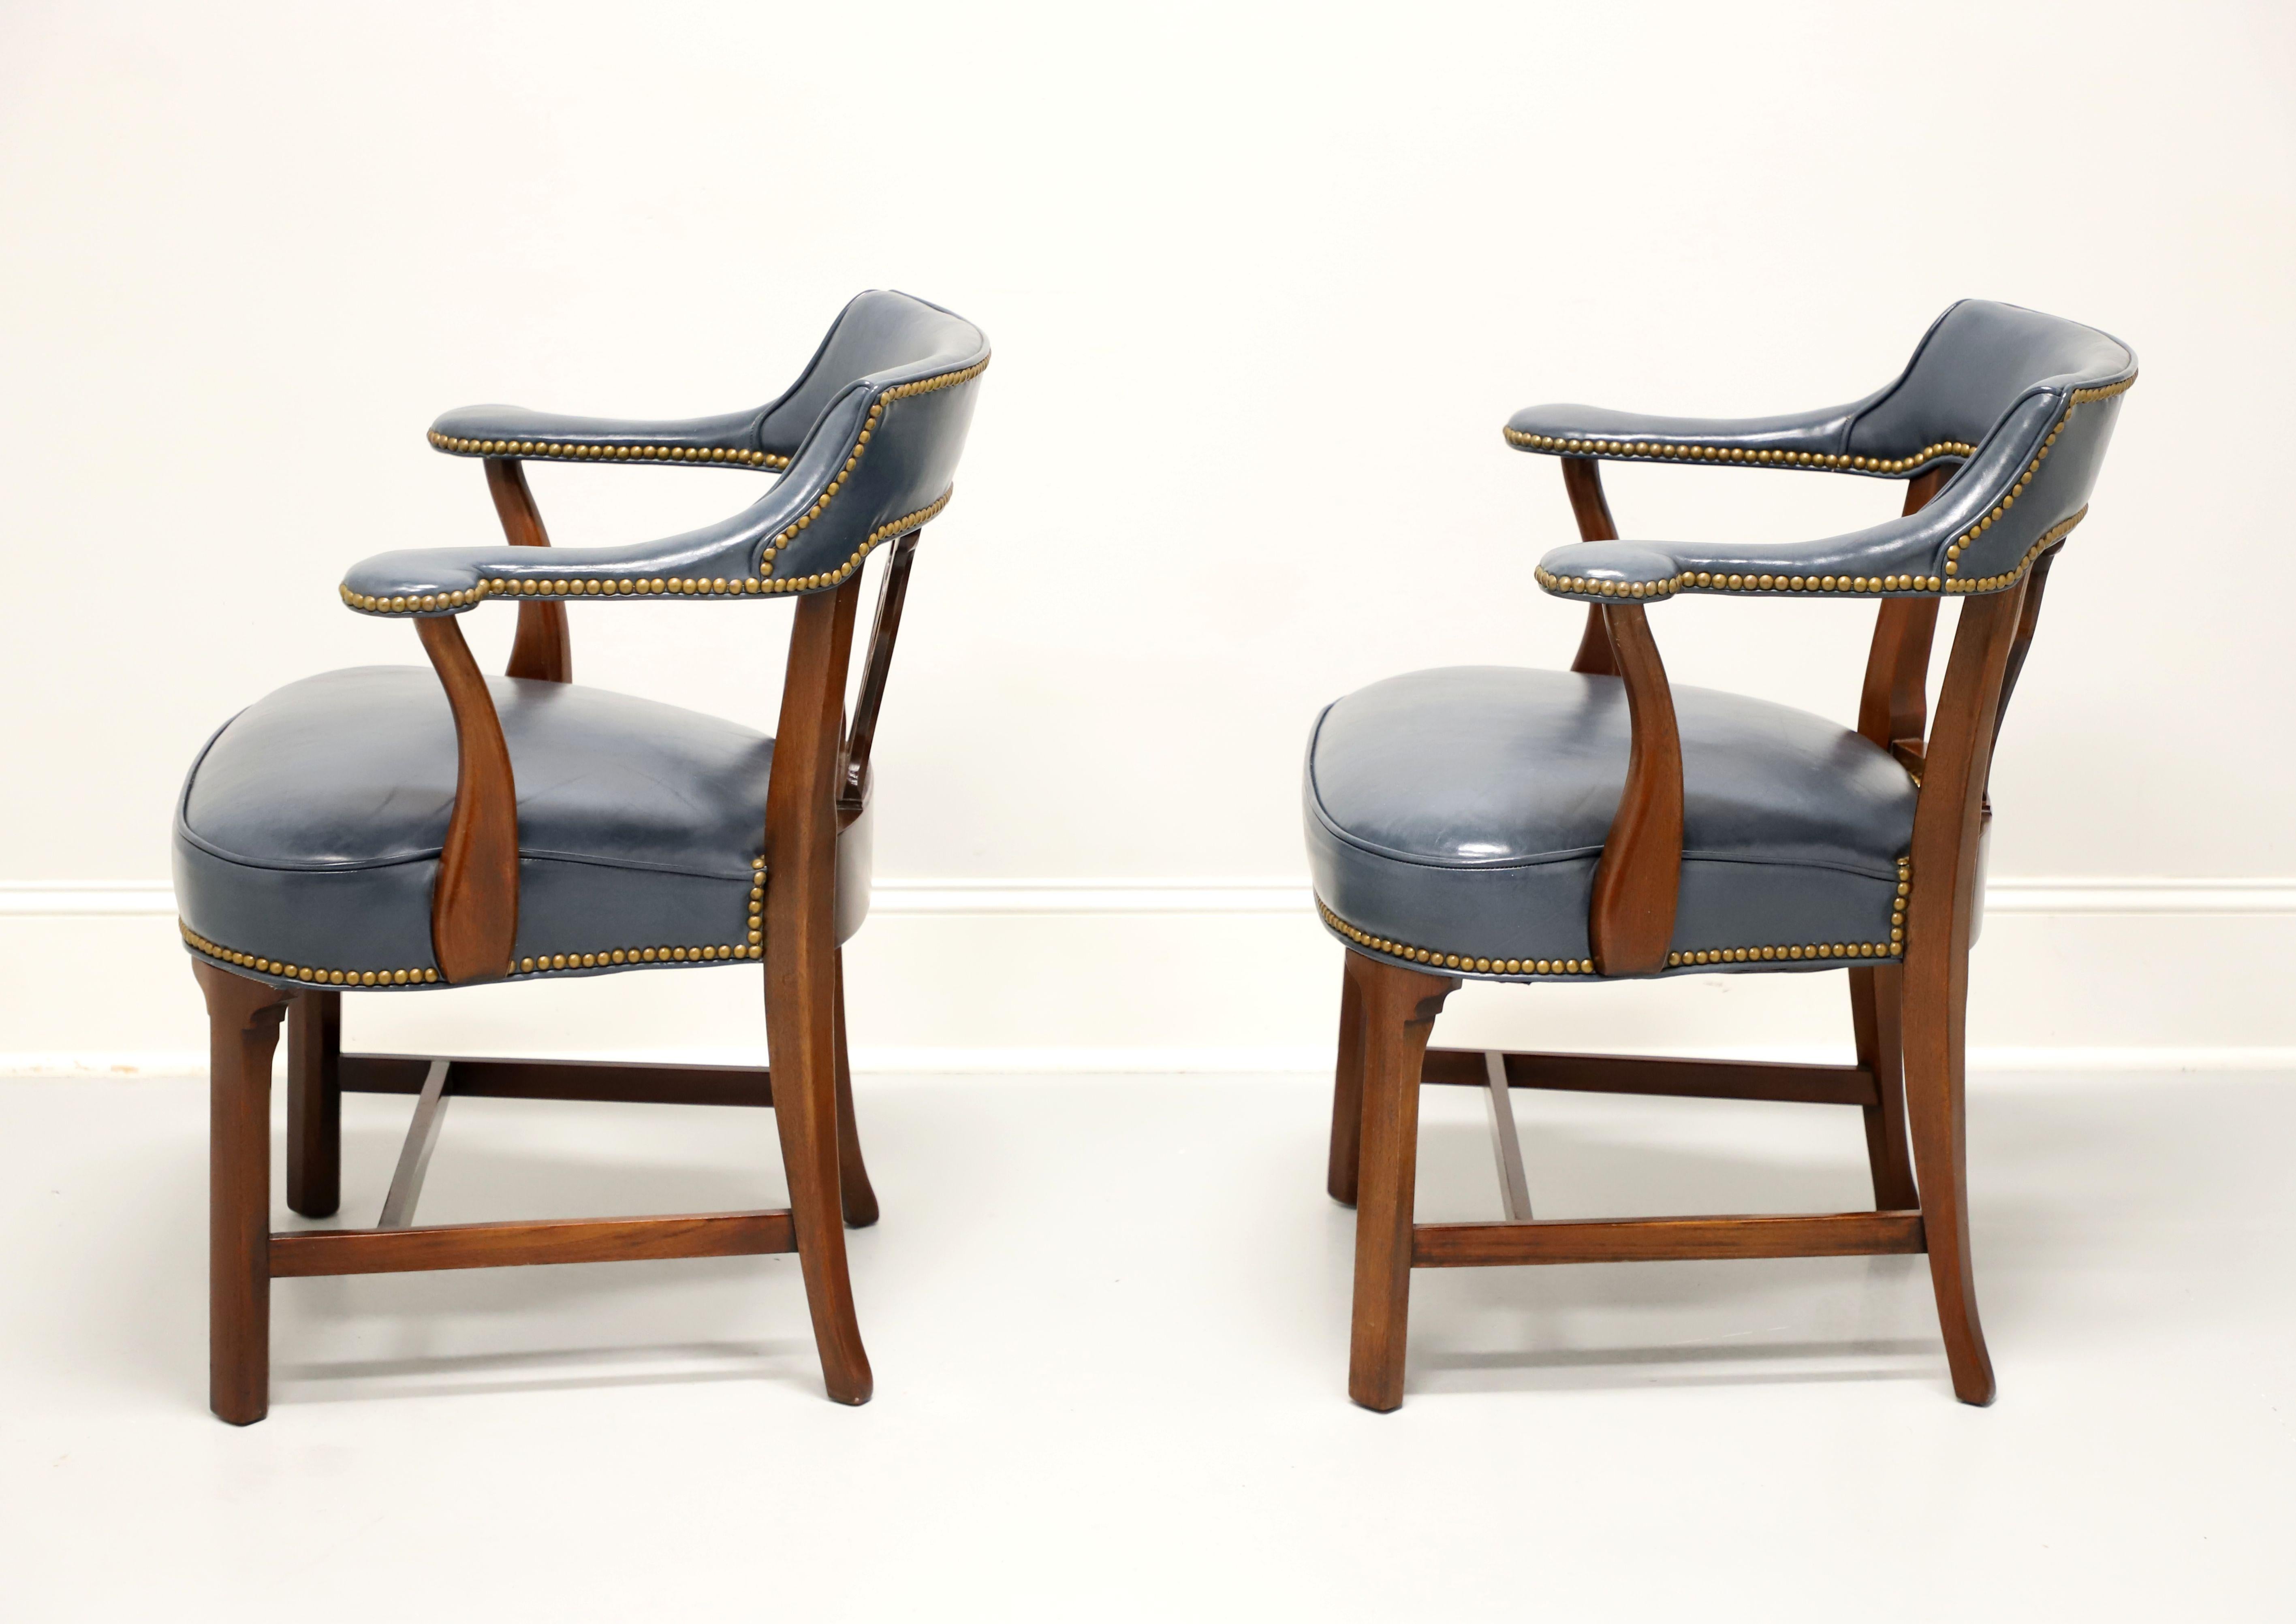 20th Century HICKORY CHAIR Mahogany Frame Blue Leather Armchairs - Pair